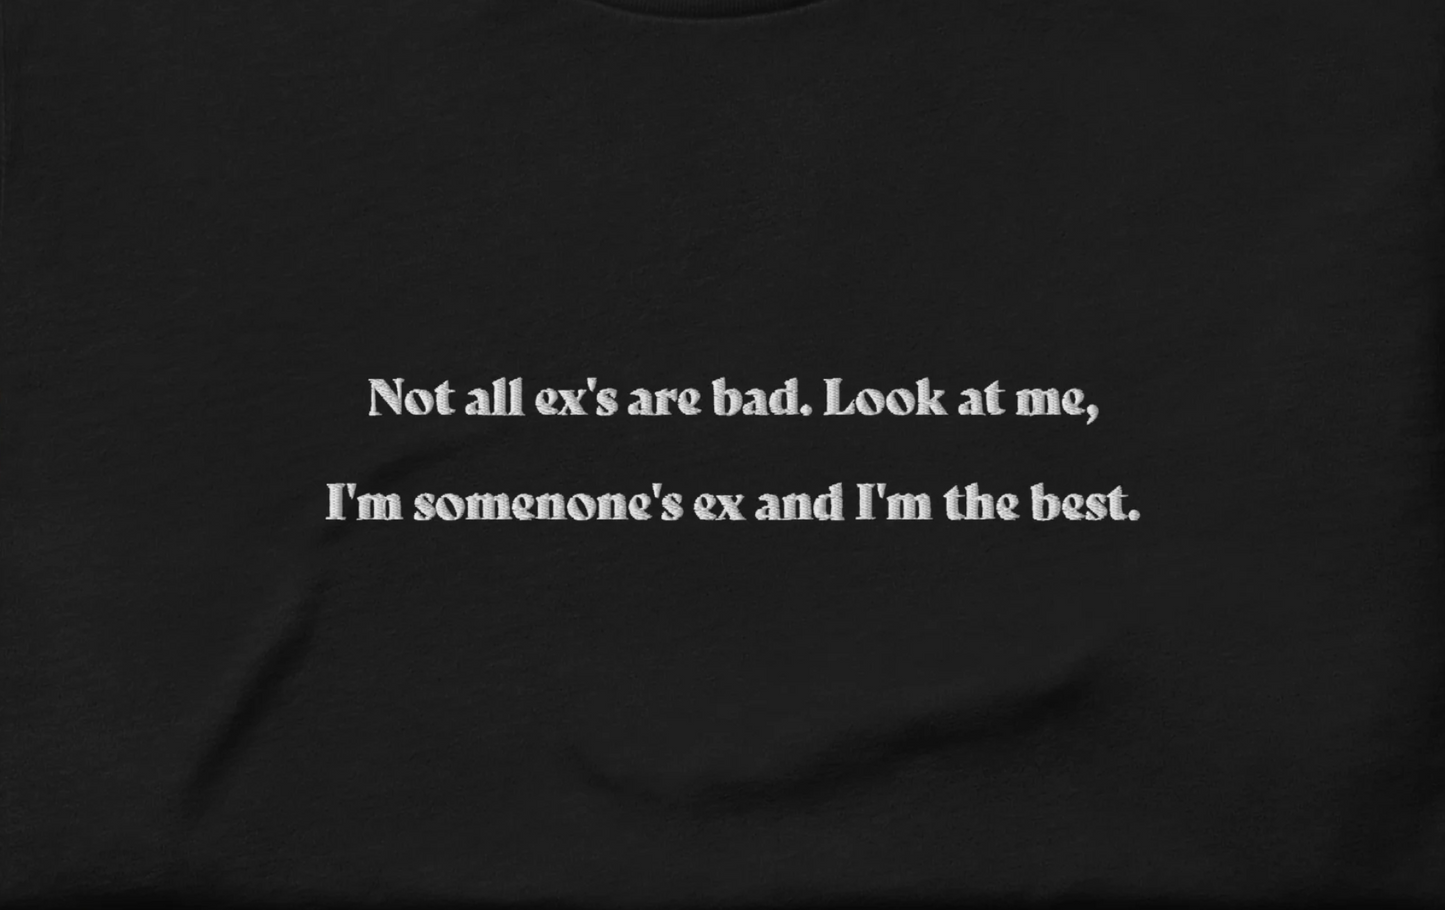 Not all ex's are bad - embroidered T-shirt